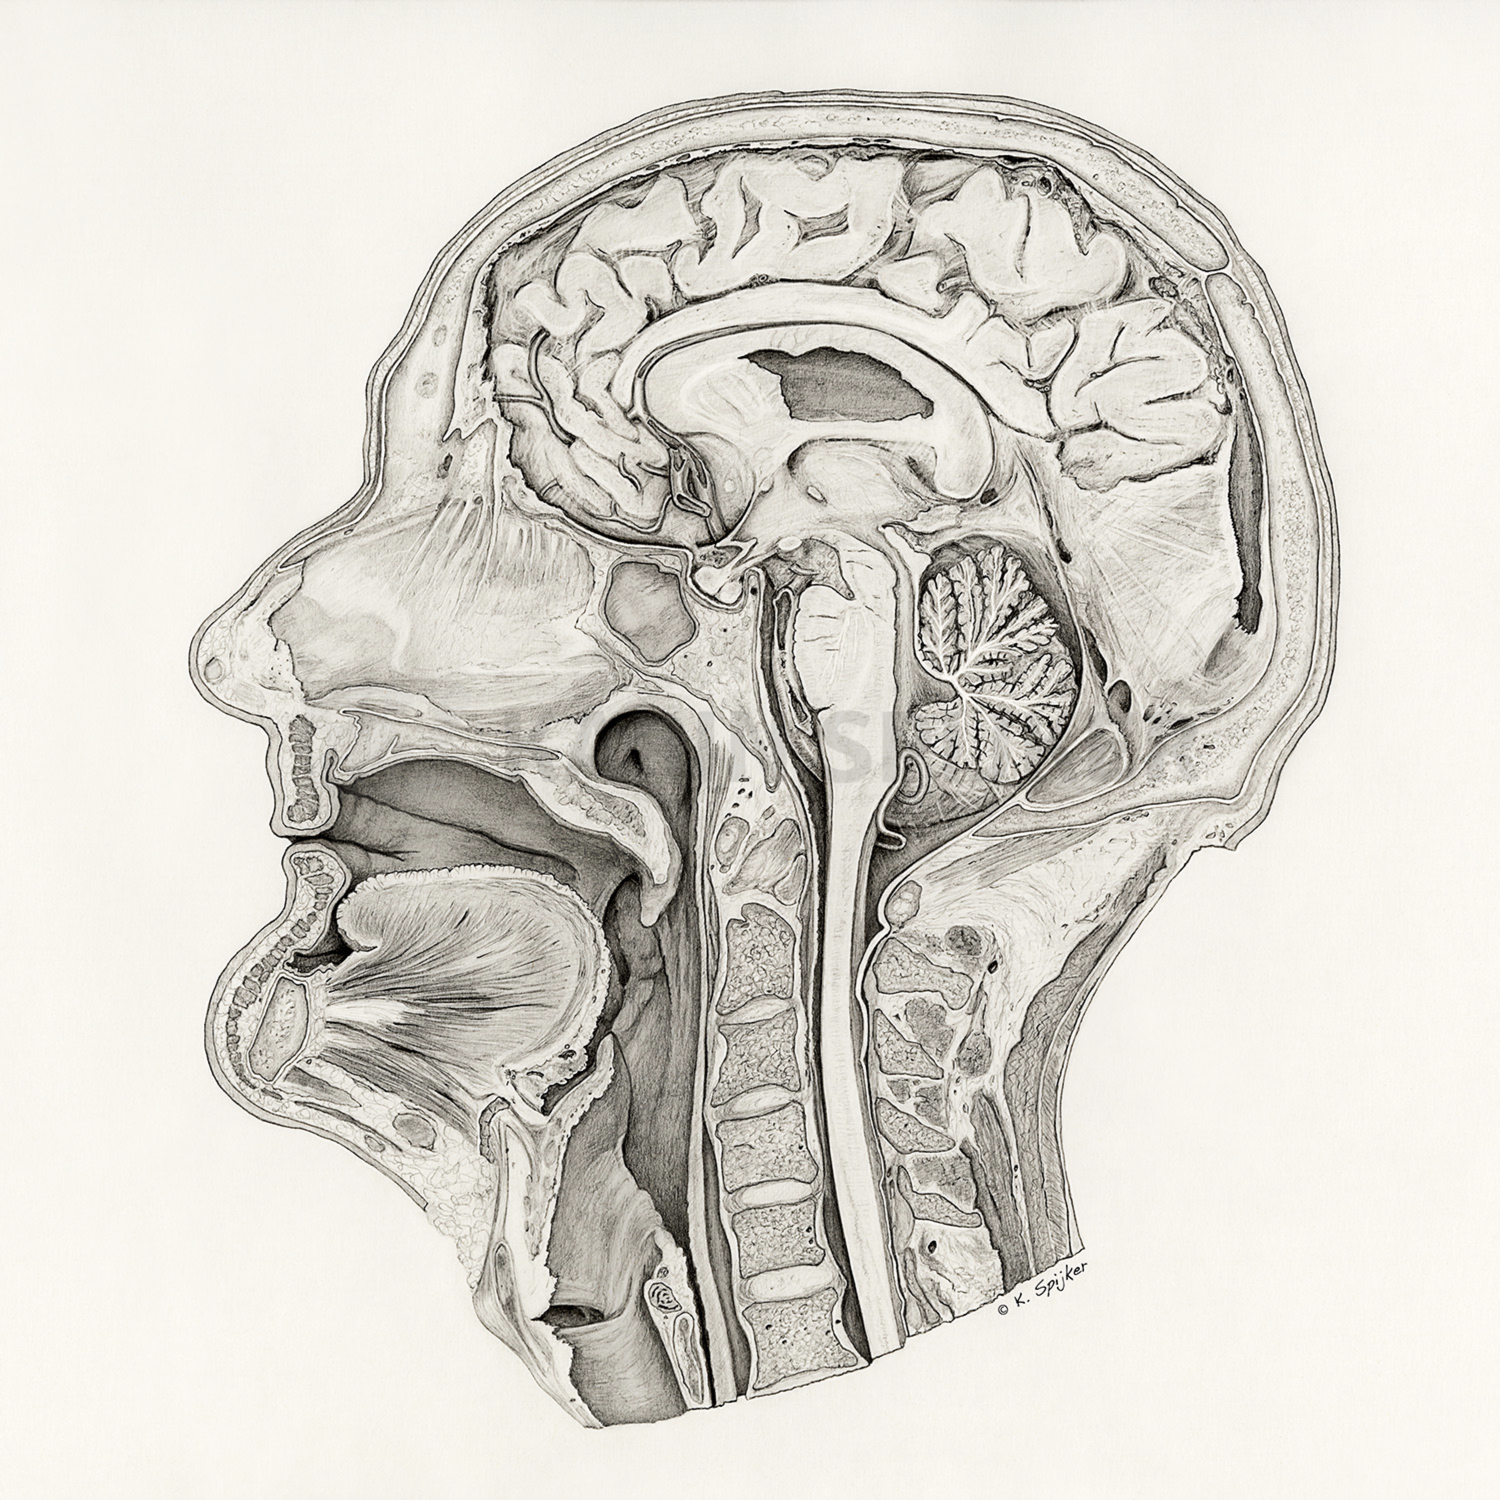 Section of a human head